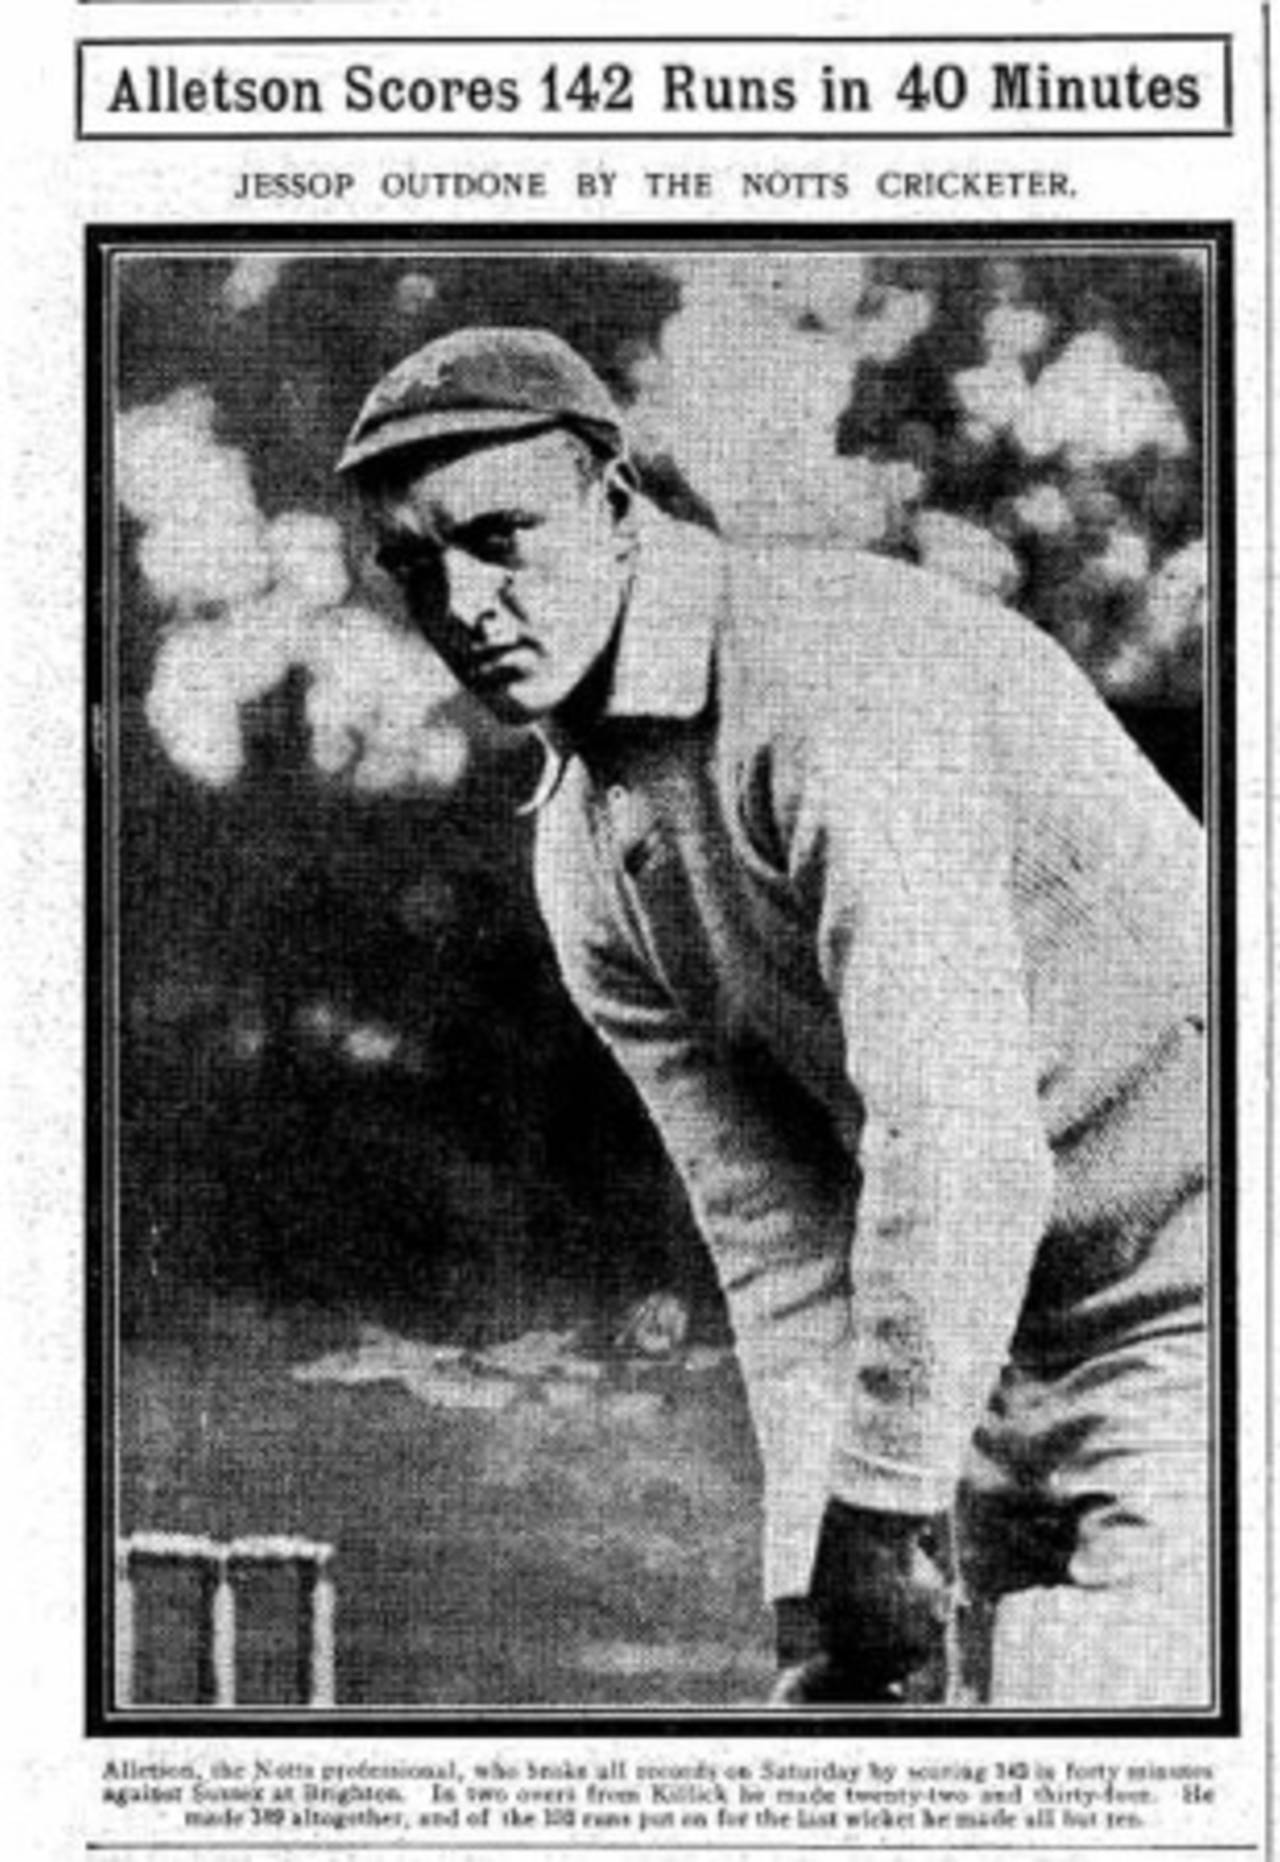 Ted Alletson's innings attracted widespread interest, May 23, 1911